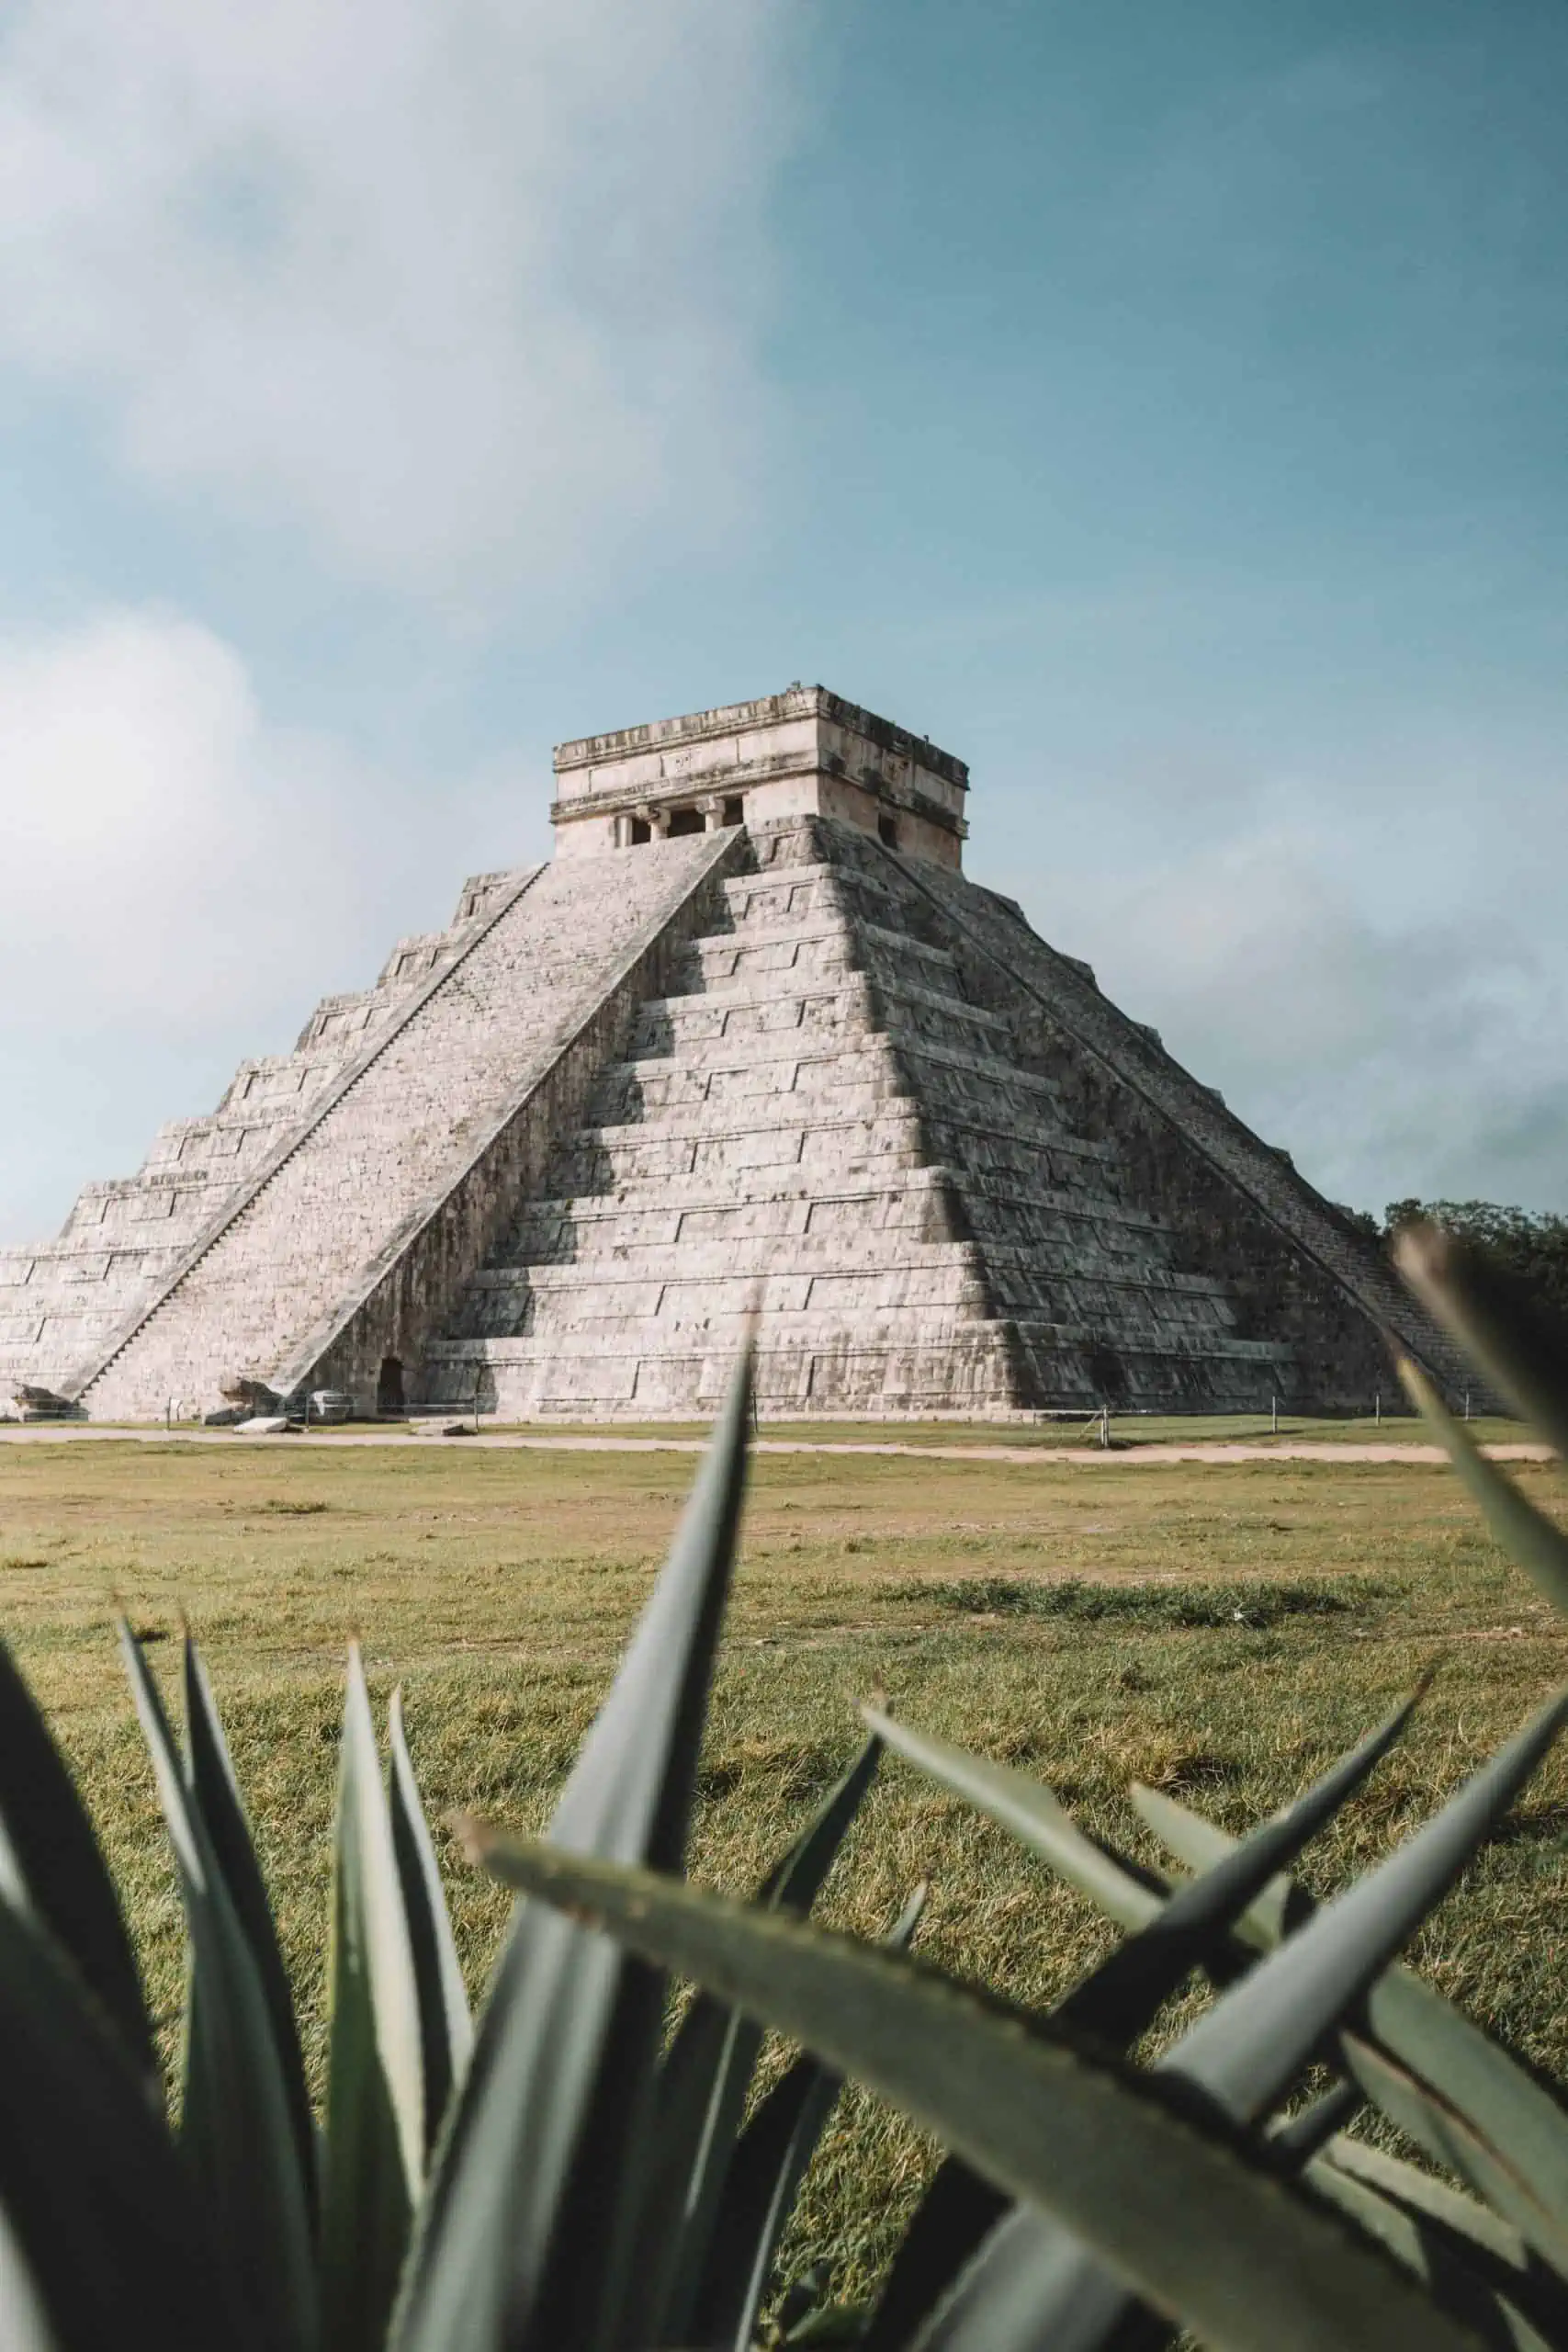 Chichen Itza, How To Get From Chiquila To Chichen Itza By Bus And Van - All Possible Ways, cheapest way from Chiquila to Chichen Itza, Chiquila to Chichen Itza, ado bus from Chiquila to Chichen Itza, AU Autobuses unidos bus from Chiquila to Chichen Itza, shared van from Chiquila to Chichen Itza, Colectivo from Chiquila to Chichen Itza, Uber from Chiquila to Chichen Itza, taxi from Chiquila to Chichen Itza